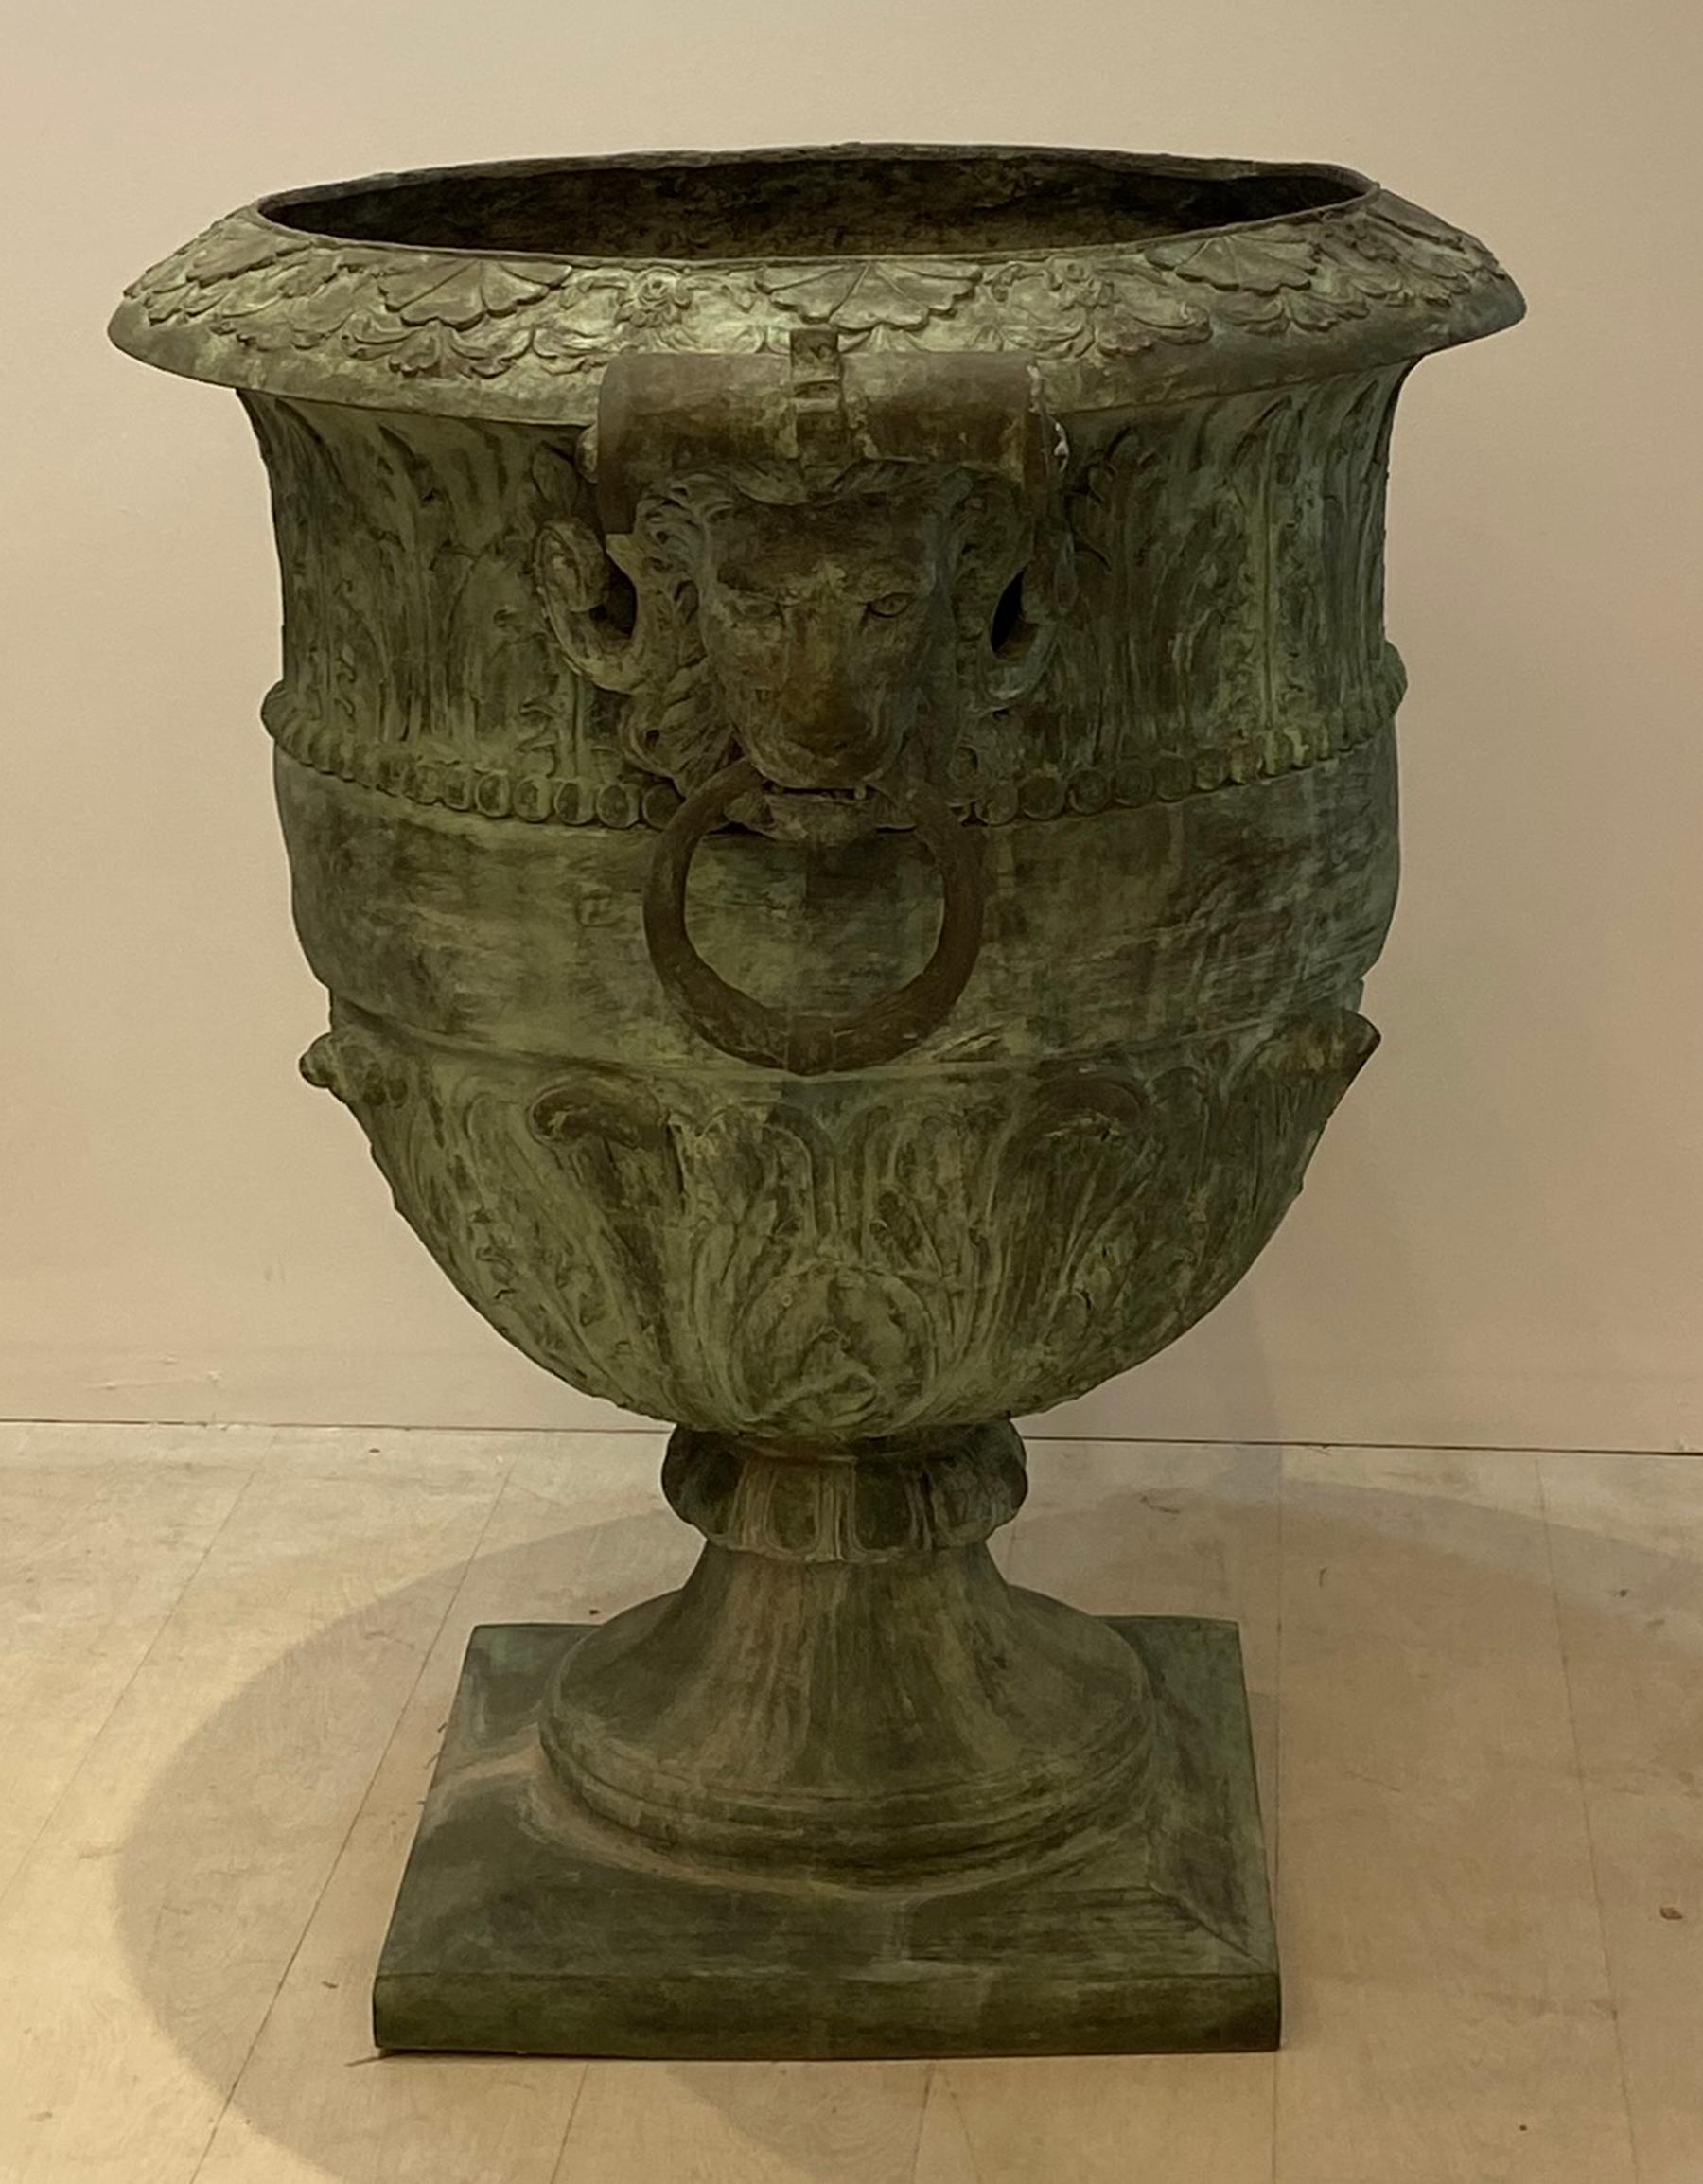 Cast bronze planter with lions head handles. Ornate casting on this large urn with good definition. Aged green patina from years of sitting outdoors in a garden. From a Miami estate.